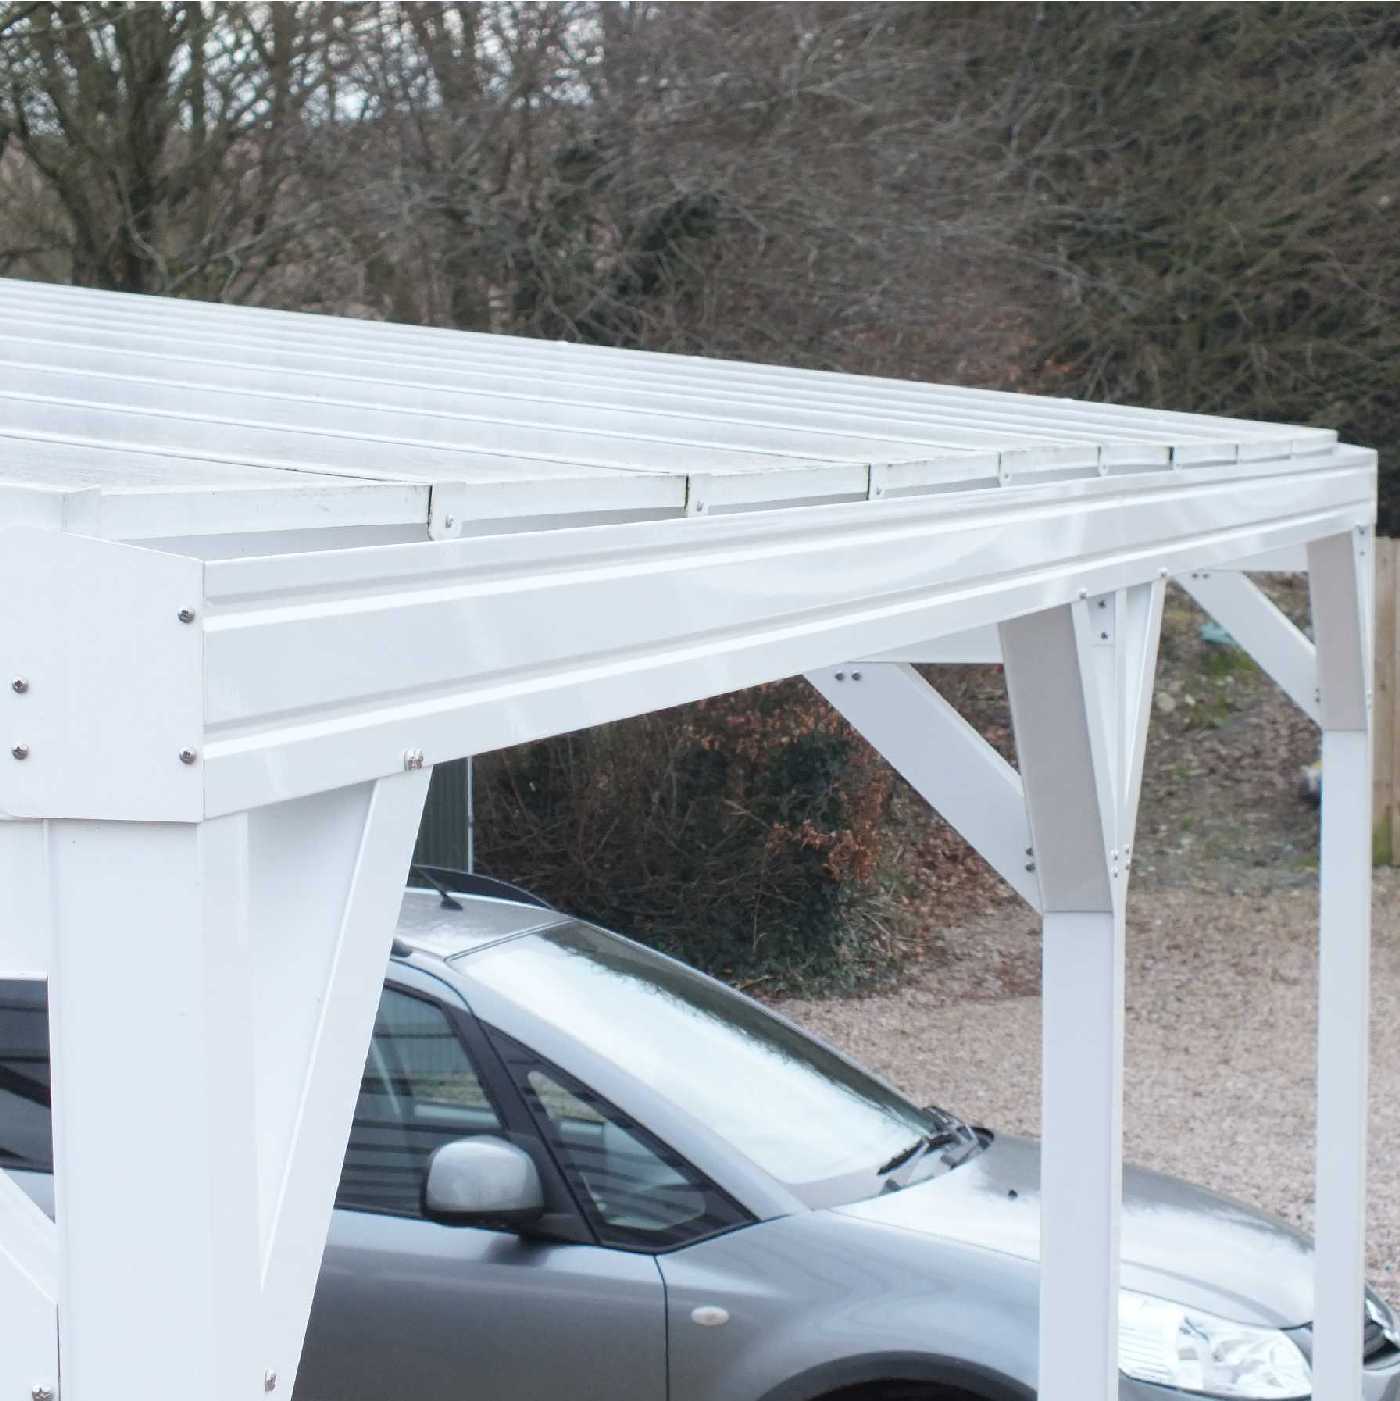 Omega Smart Free-Standing, White MonoPitch Roof Canopy with 16mm Polycarbonate Glazing - 7.0m (W) x 3.5m (P), (8) Supporting Posts from Omega Build